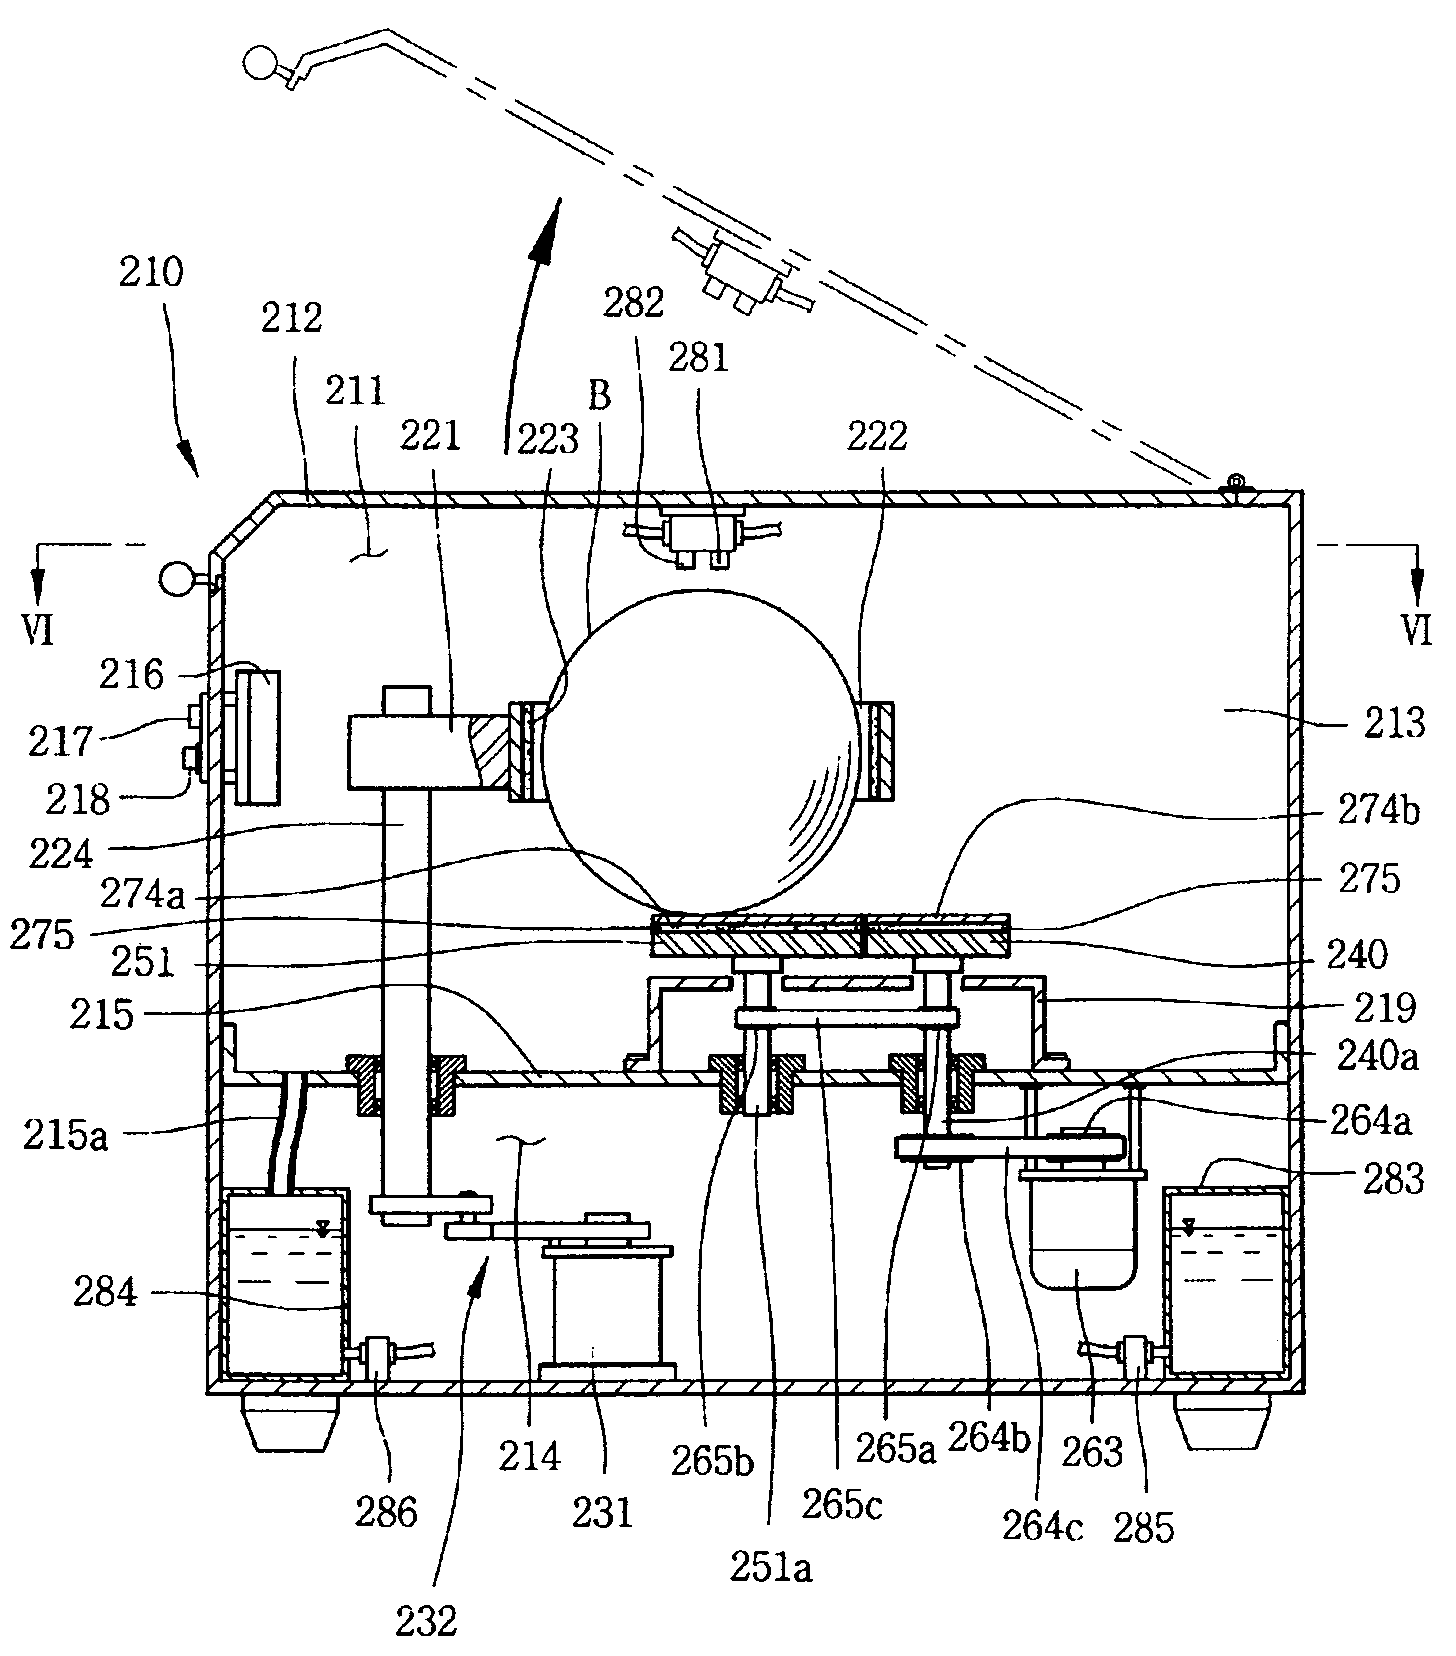 Bowling ball surface treatment device